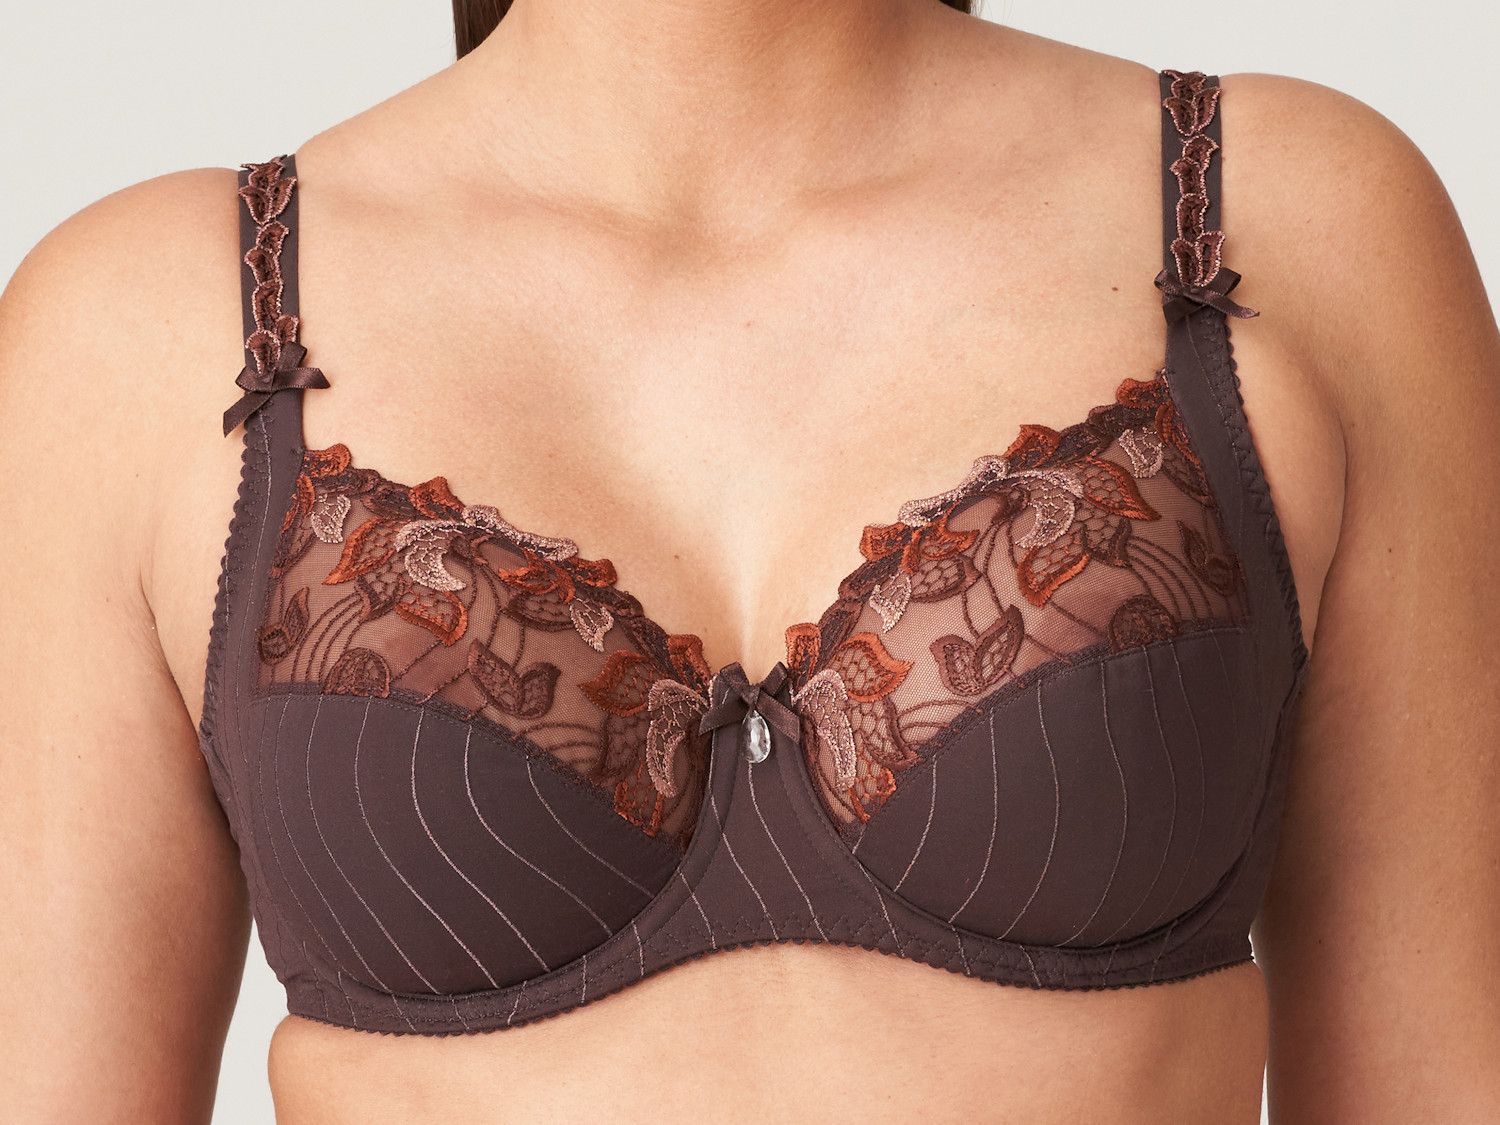 PrimaDonna Deauville Large Cups Full Cup Wire Bra in Caffe Latte